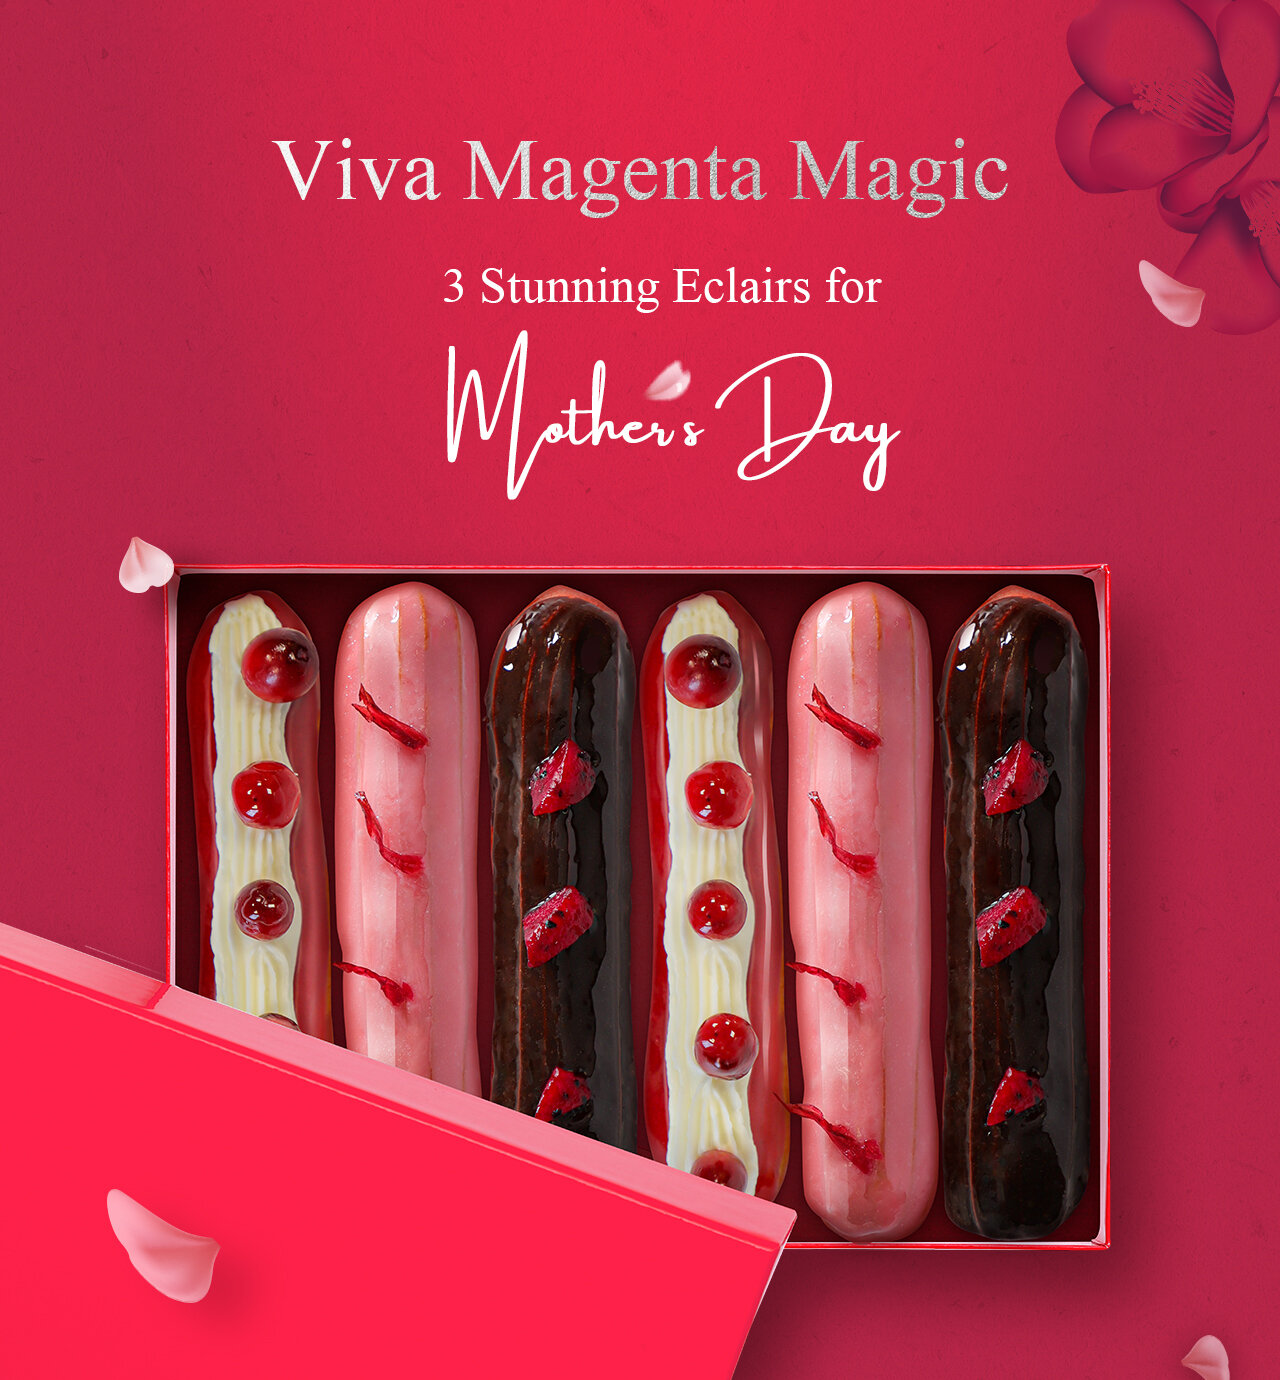 🎁 Celebrate Mothers With The Color Of The Year 🎁
We are thrilled to introduce Chewo Eclair Mix through recipes infused with the boldest, brightest, and most electric color of the year: Viva Magenta!

So what are you waiting for? Get your hands on C